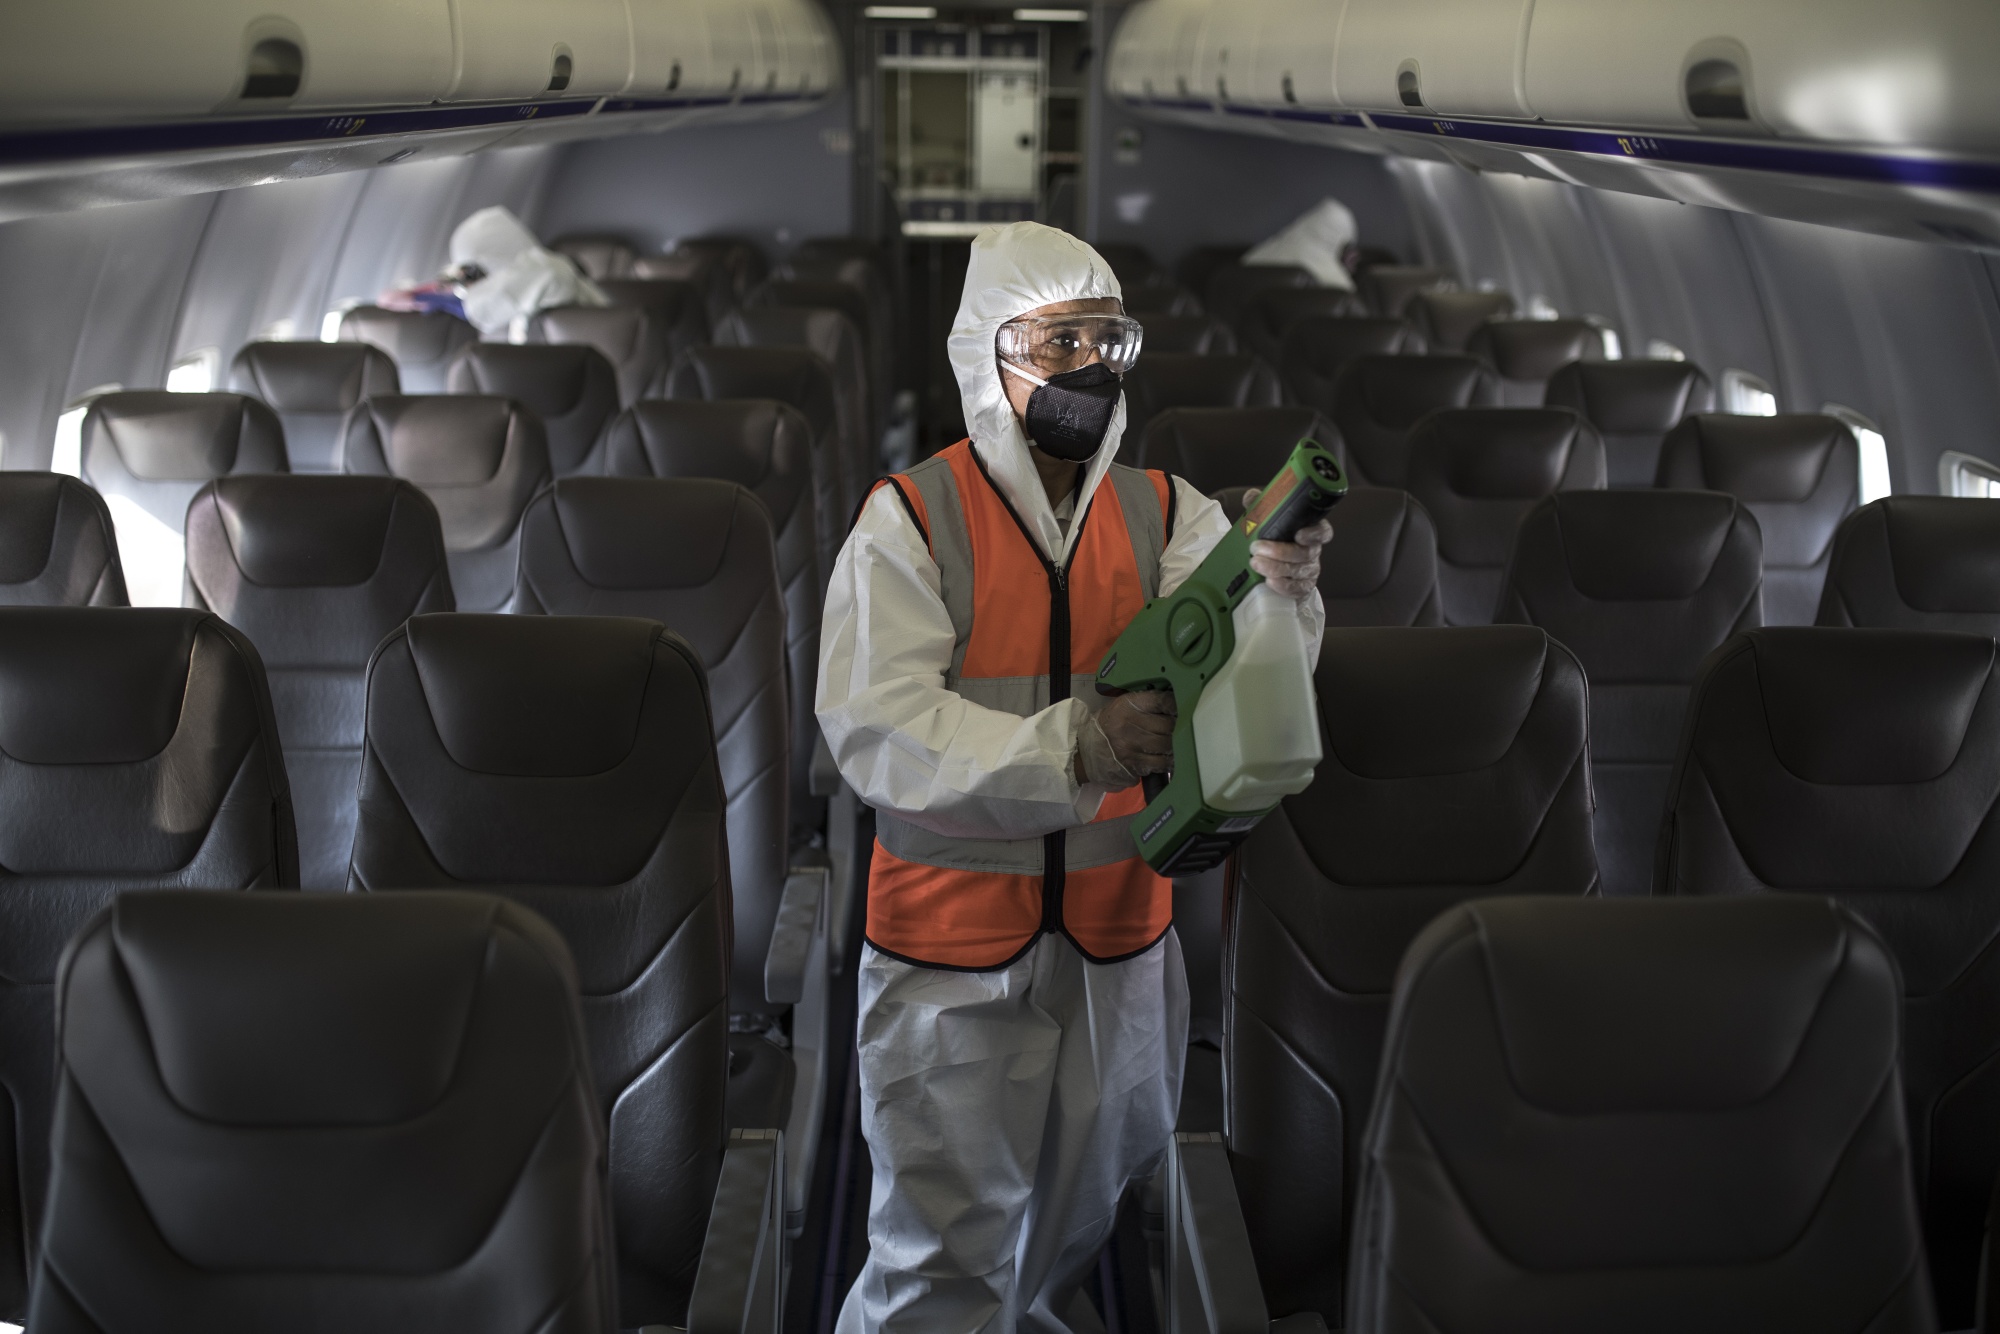 Workers disinfect a plane before flights resumed&nbsp;in Bogota, Colombia.&nbsp;